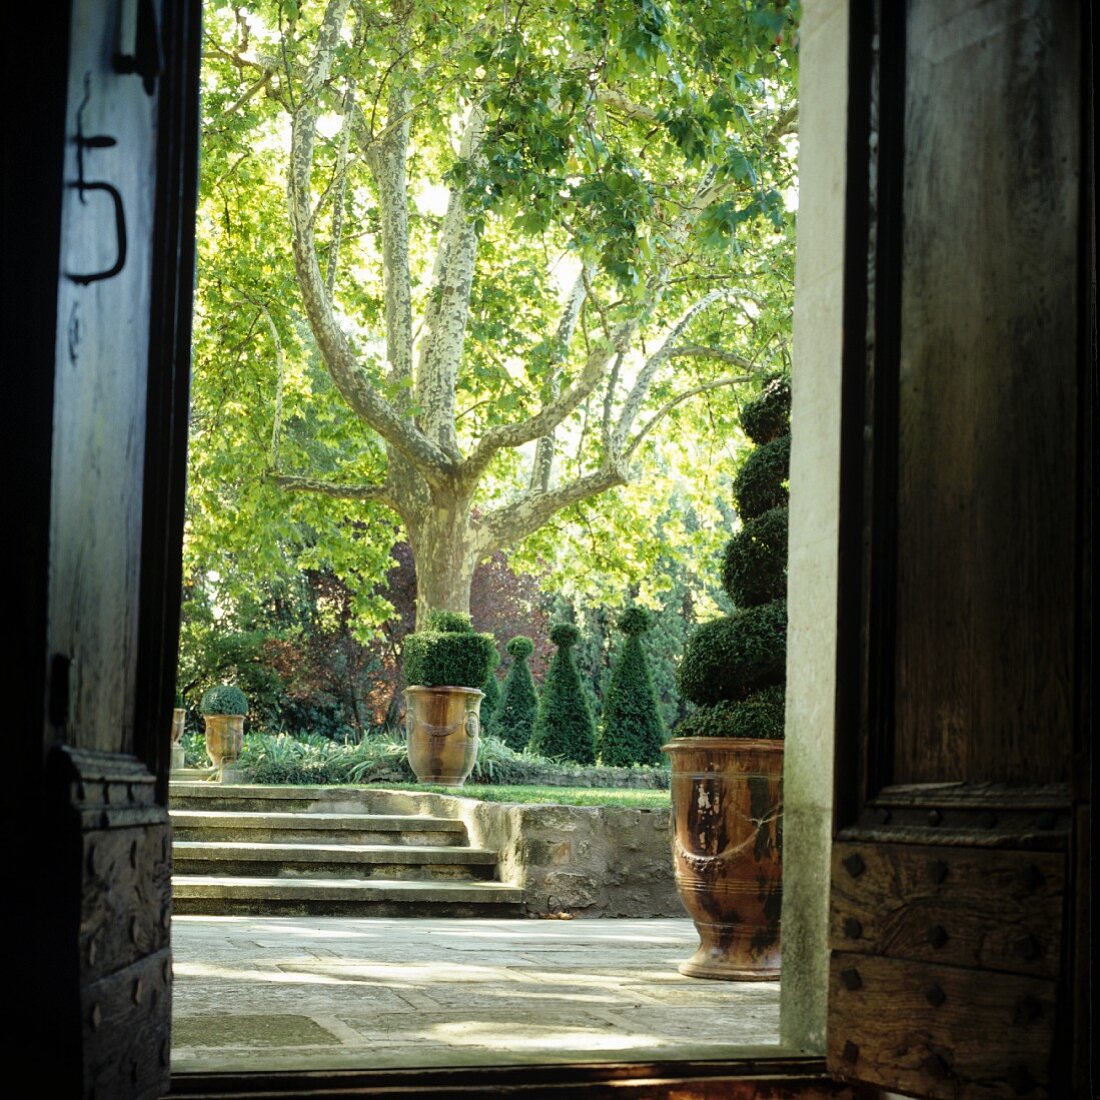 View from front door of house into gardens with steps and topiary bushes